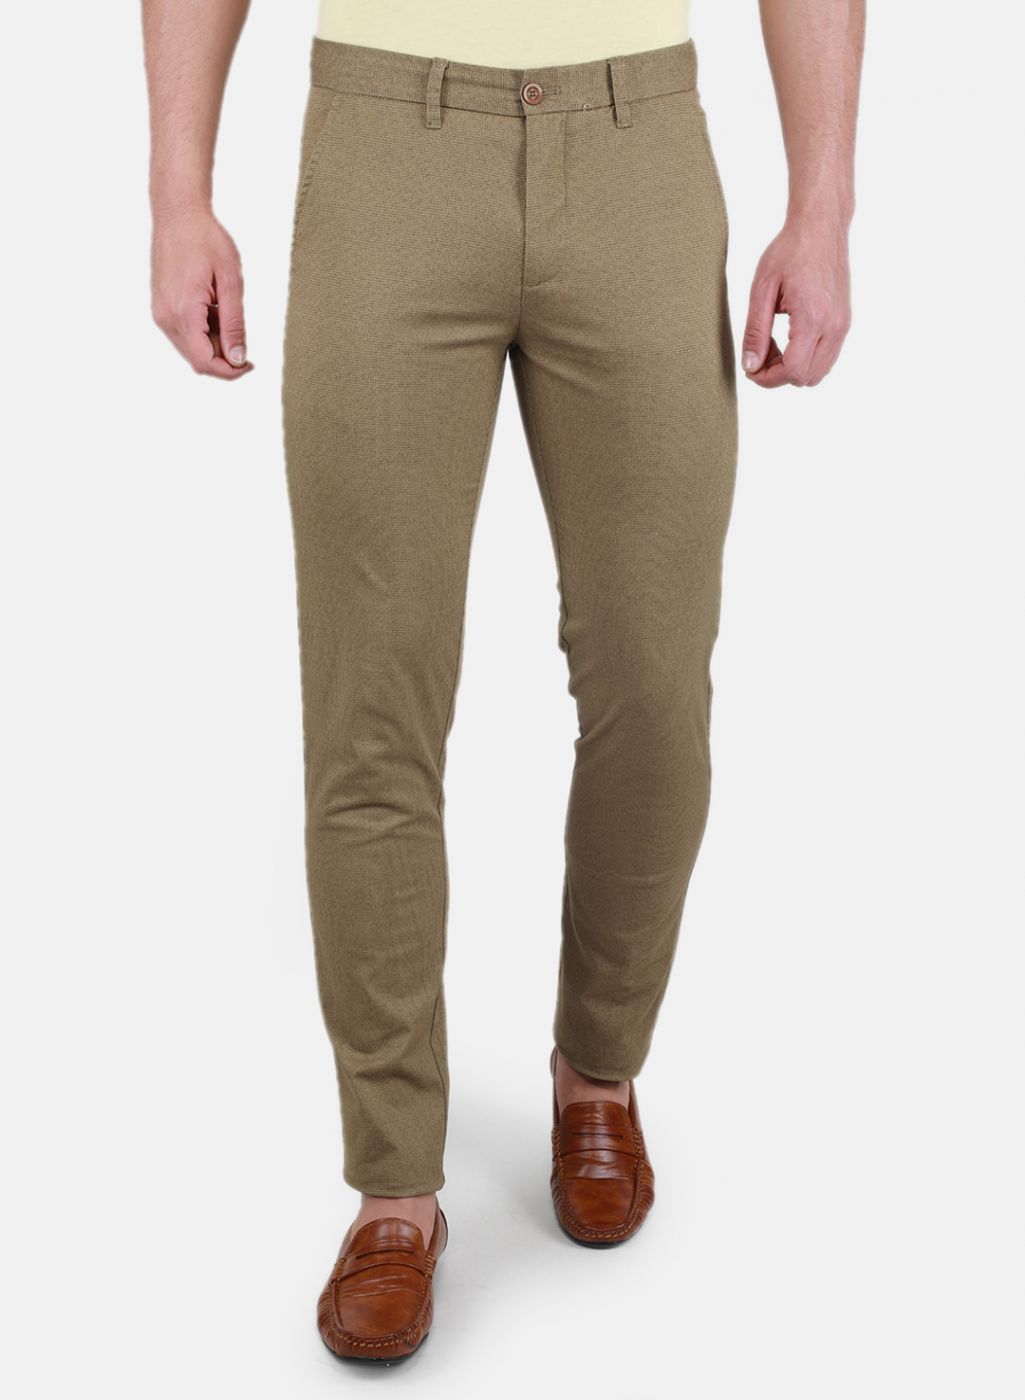 Buy U.S. Polo Assn. Austin Trim Fit Flat Front Casual Trousers - NNNOW.com